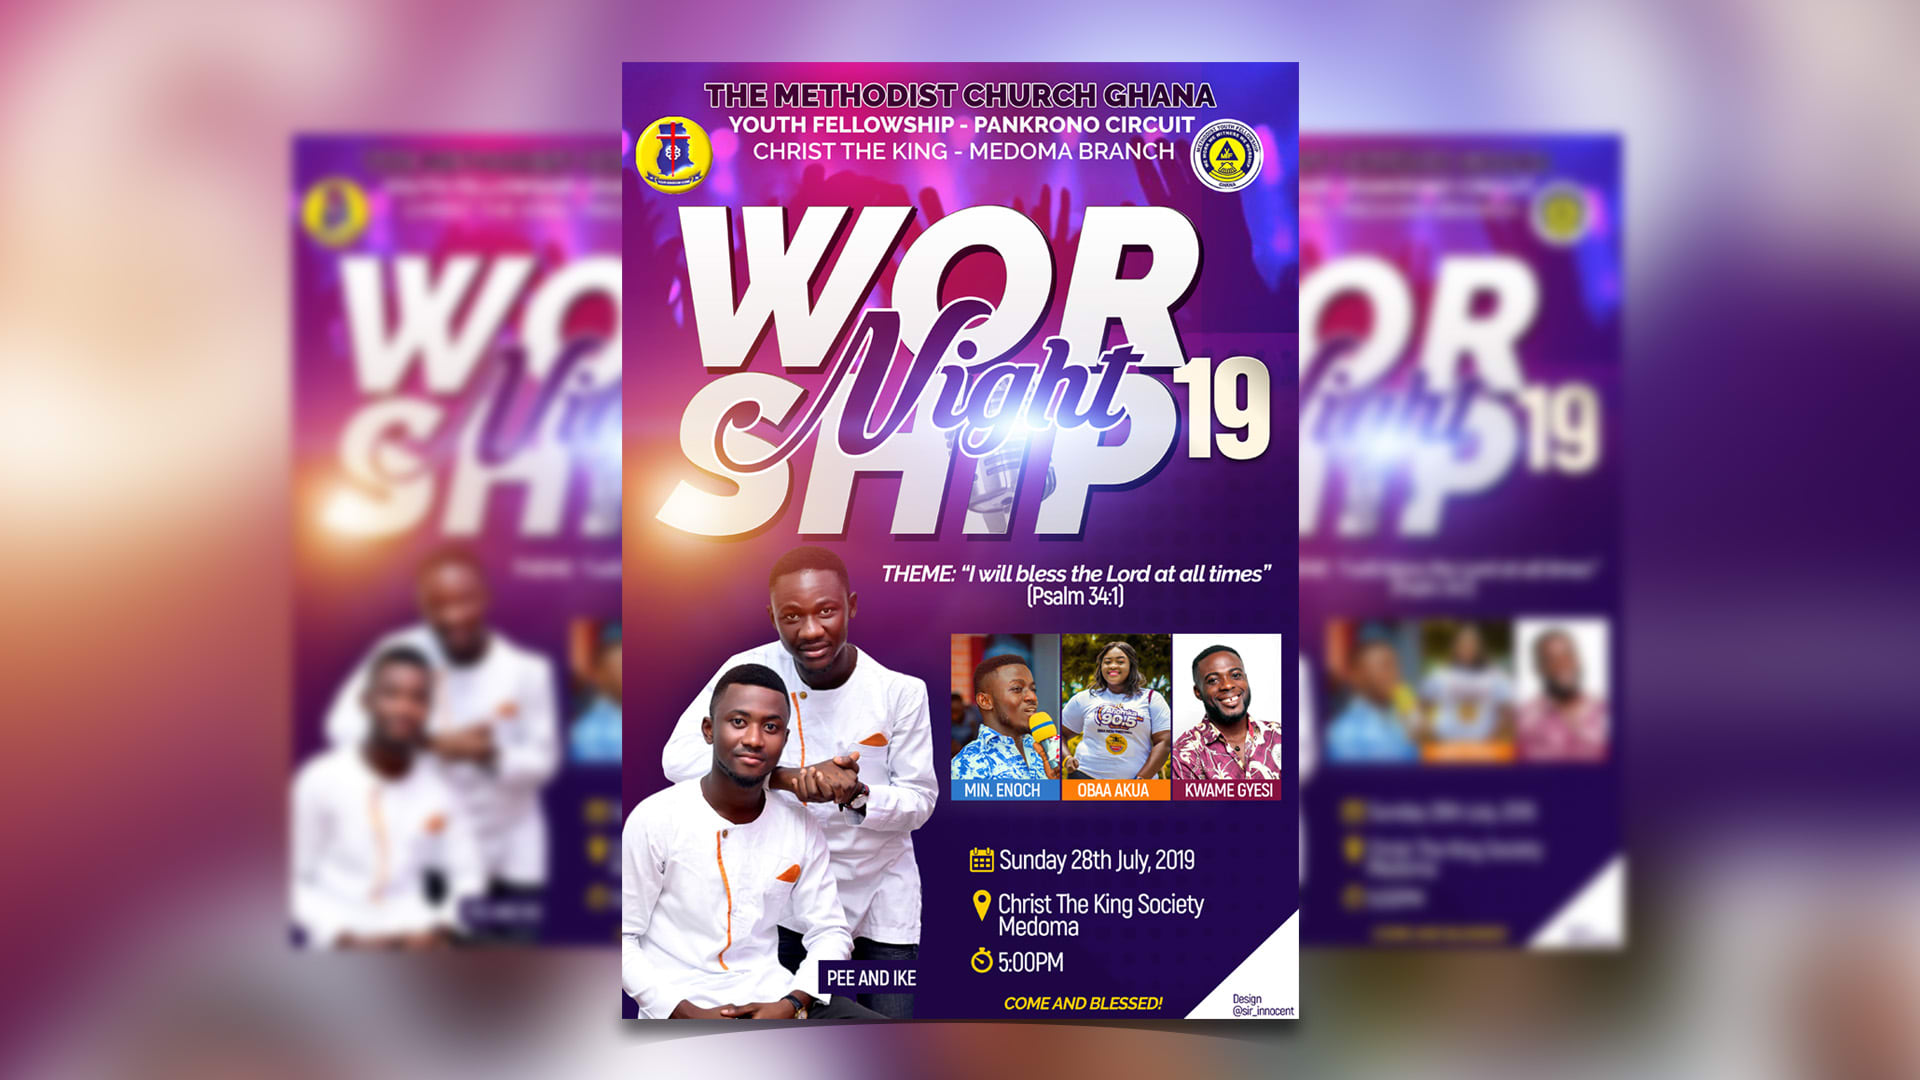 Design A Unique Church Flyer In 12 Hours By Sir Innocent